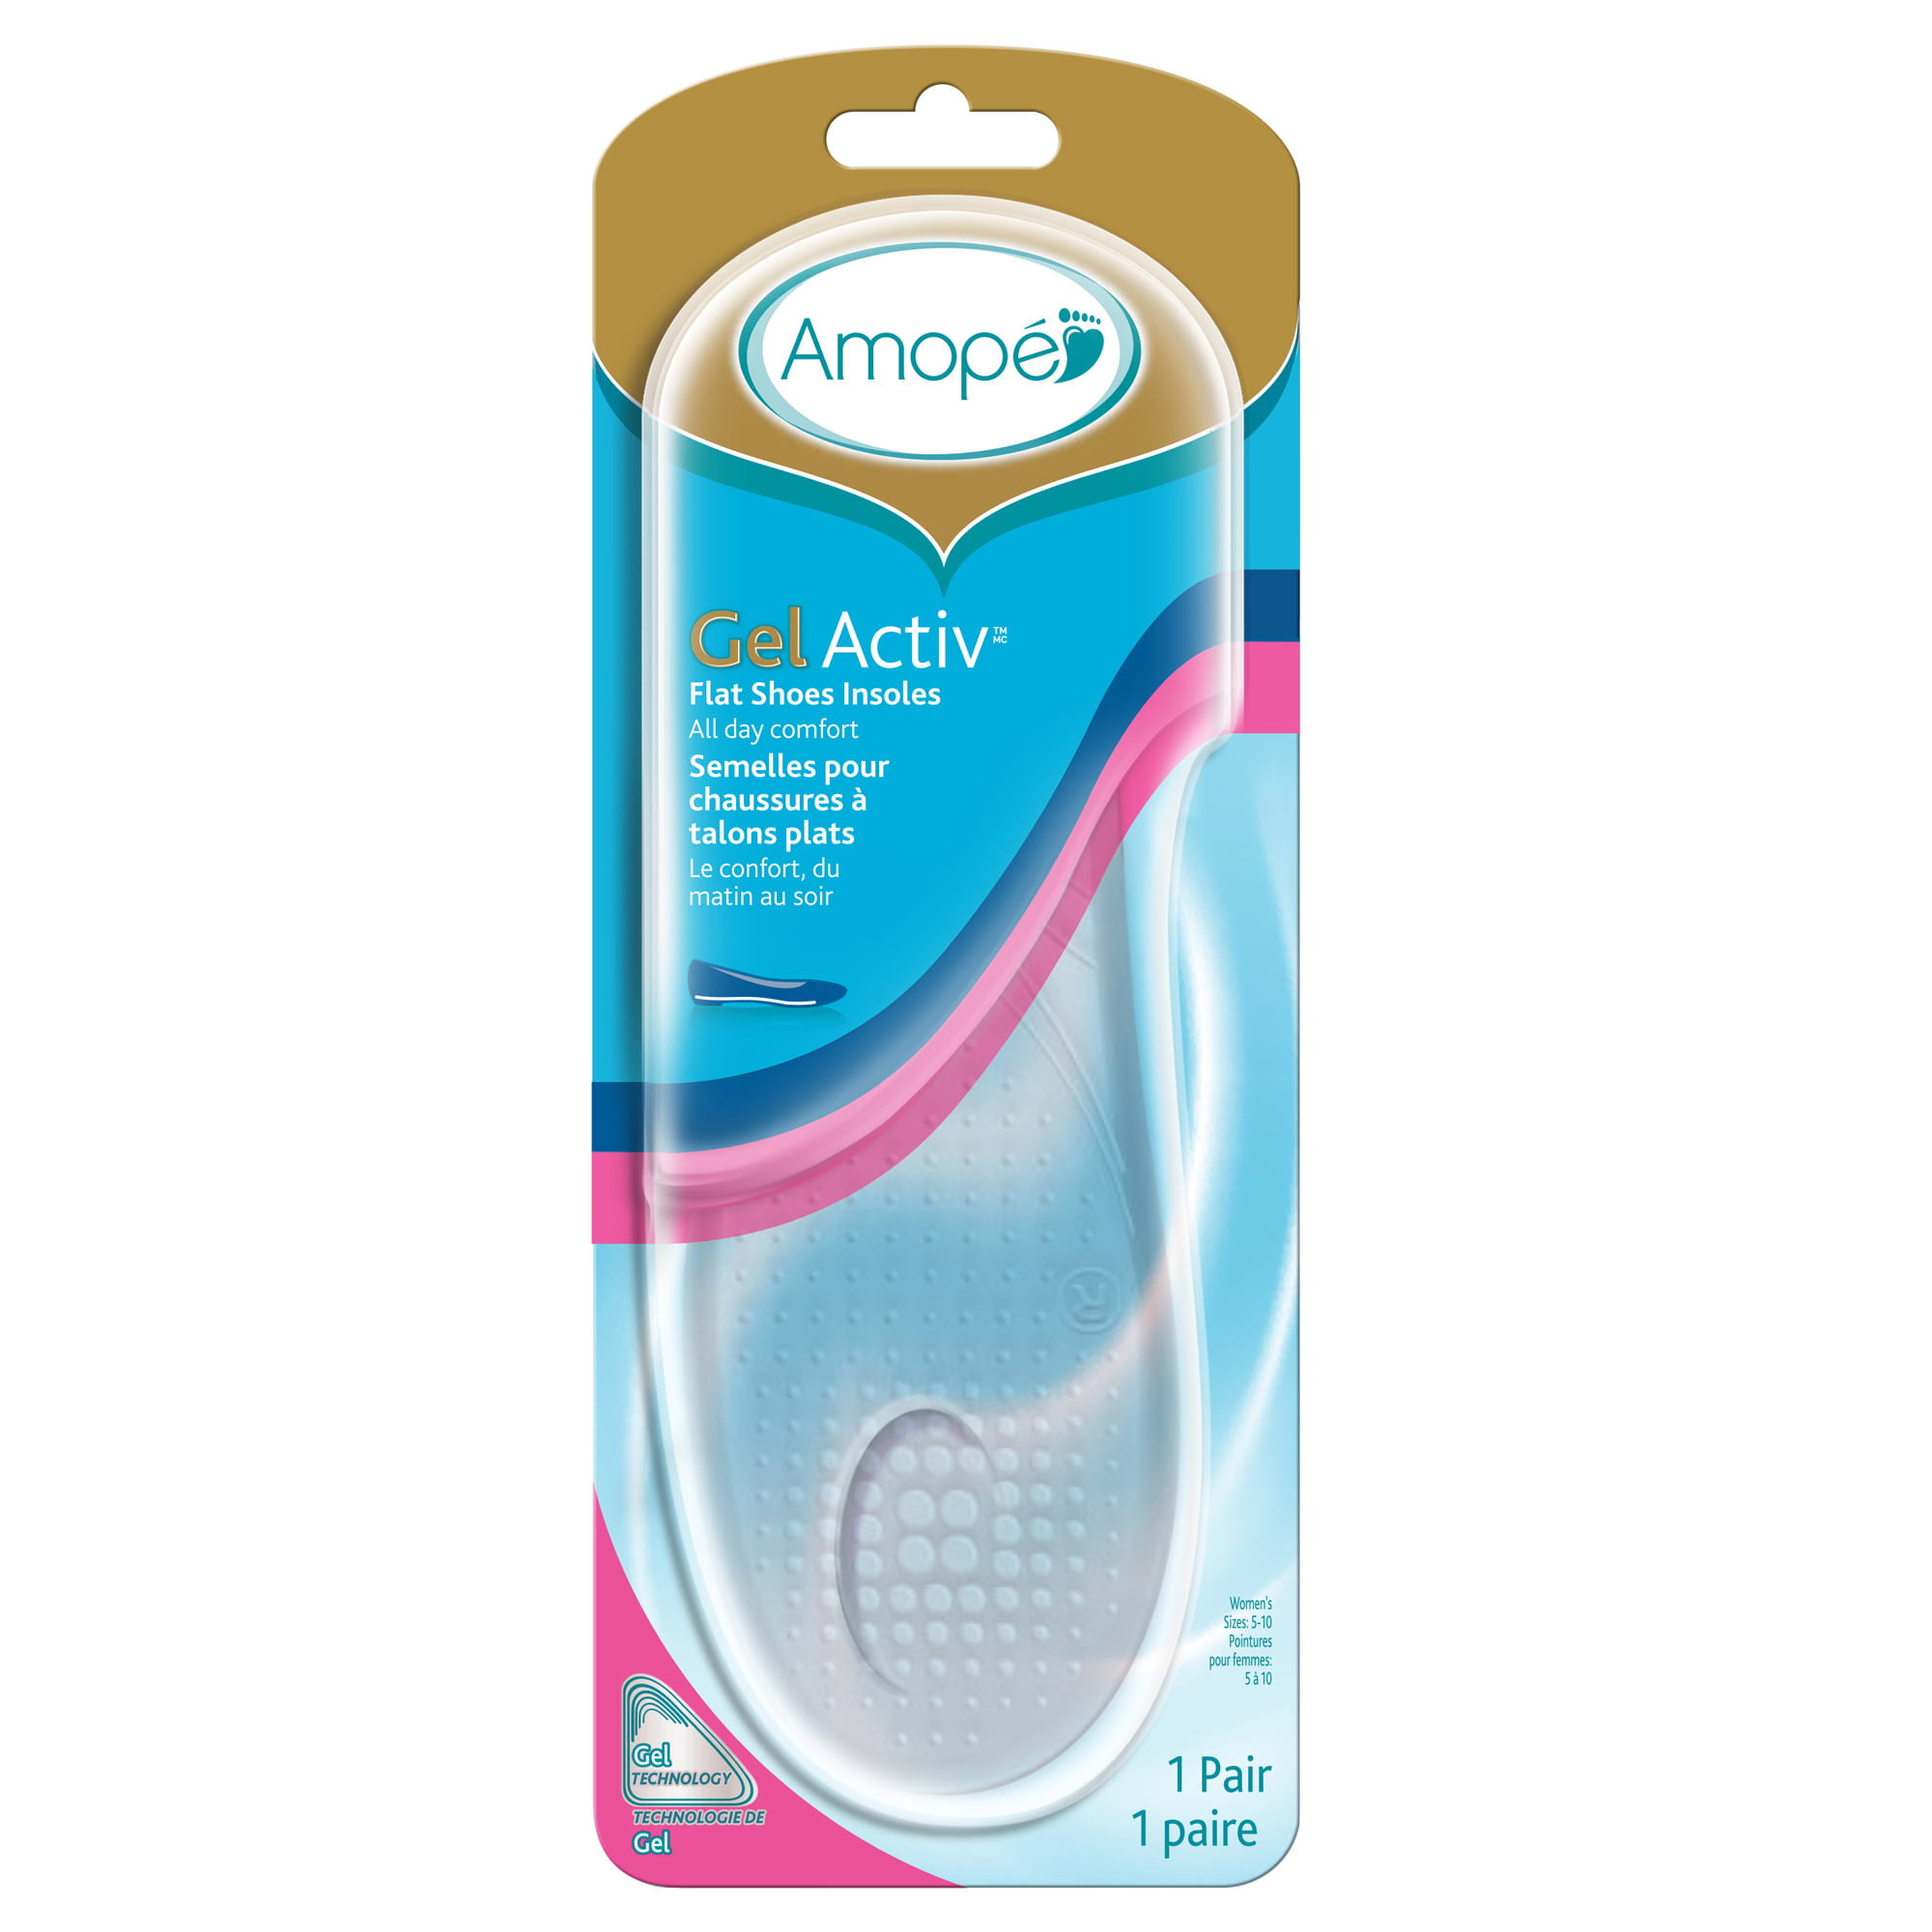 MENS LADIES ACTIFRESH ANTIBACTERIAL PERFORATED WHITE INSOLES TWO PAIRS £4 SIZE 7 